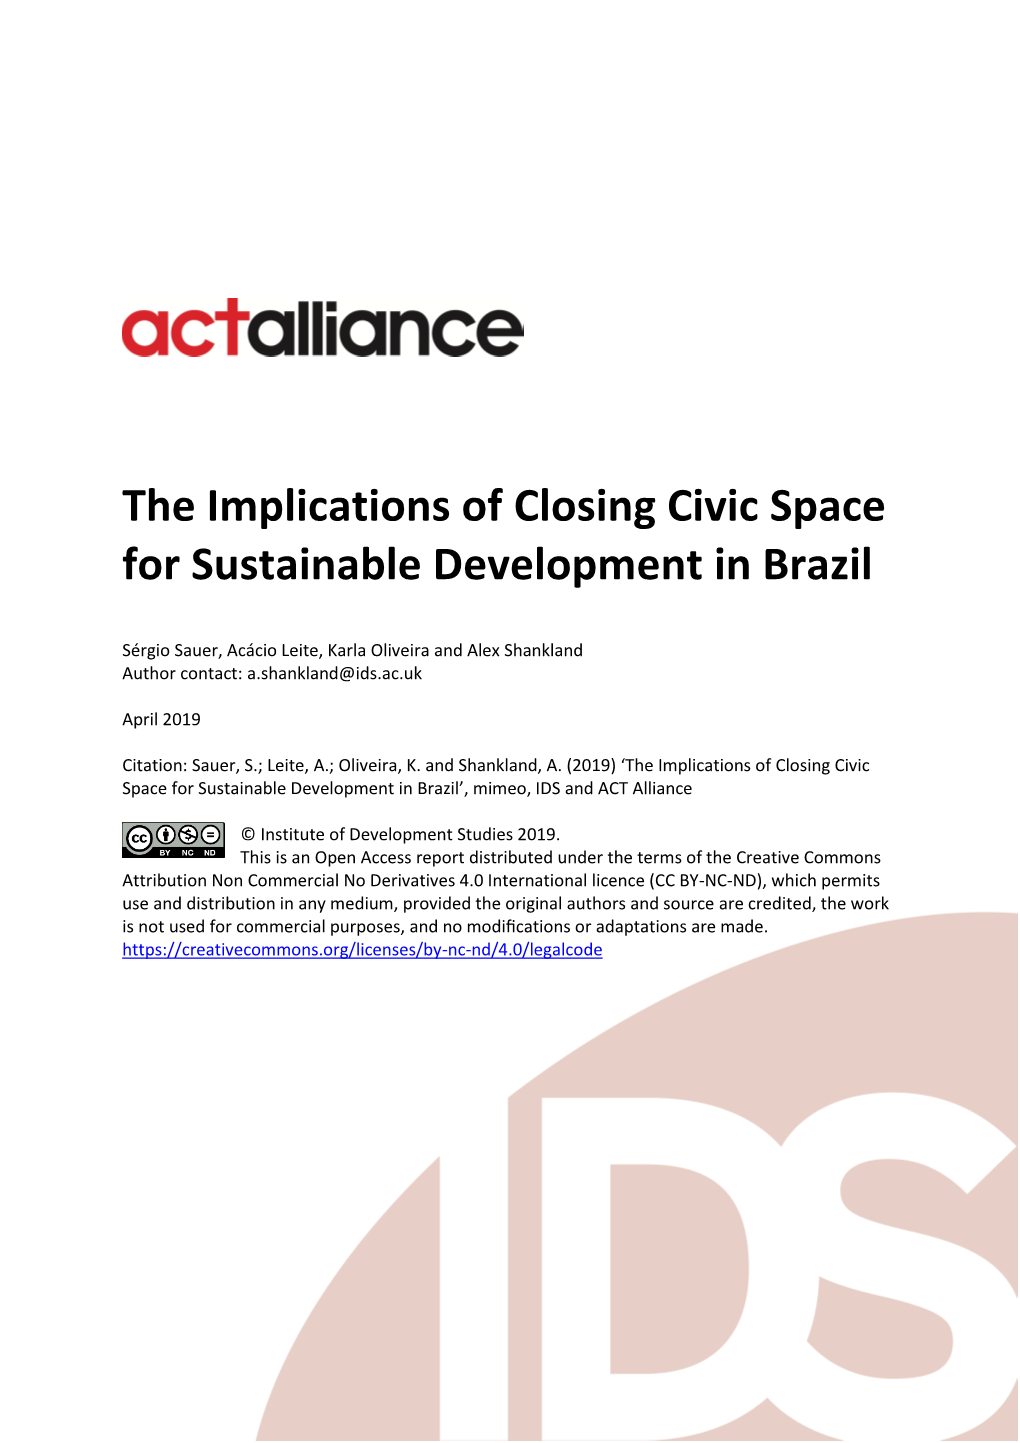 The Implications of Closing Civic Space for Sustainable Development in Brazil